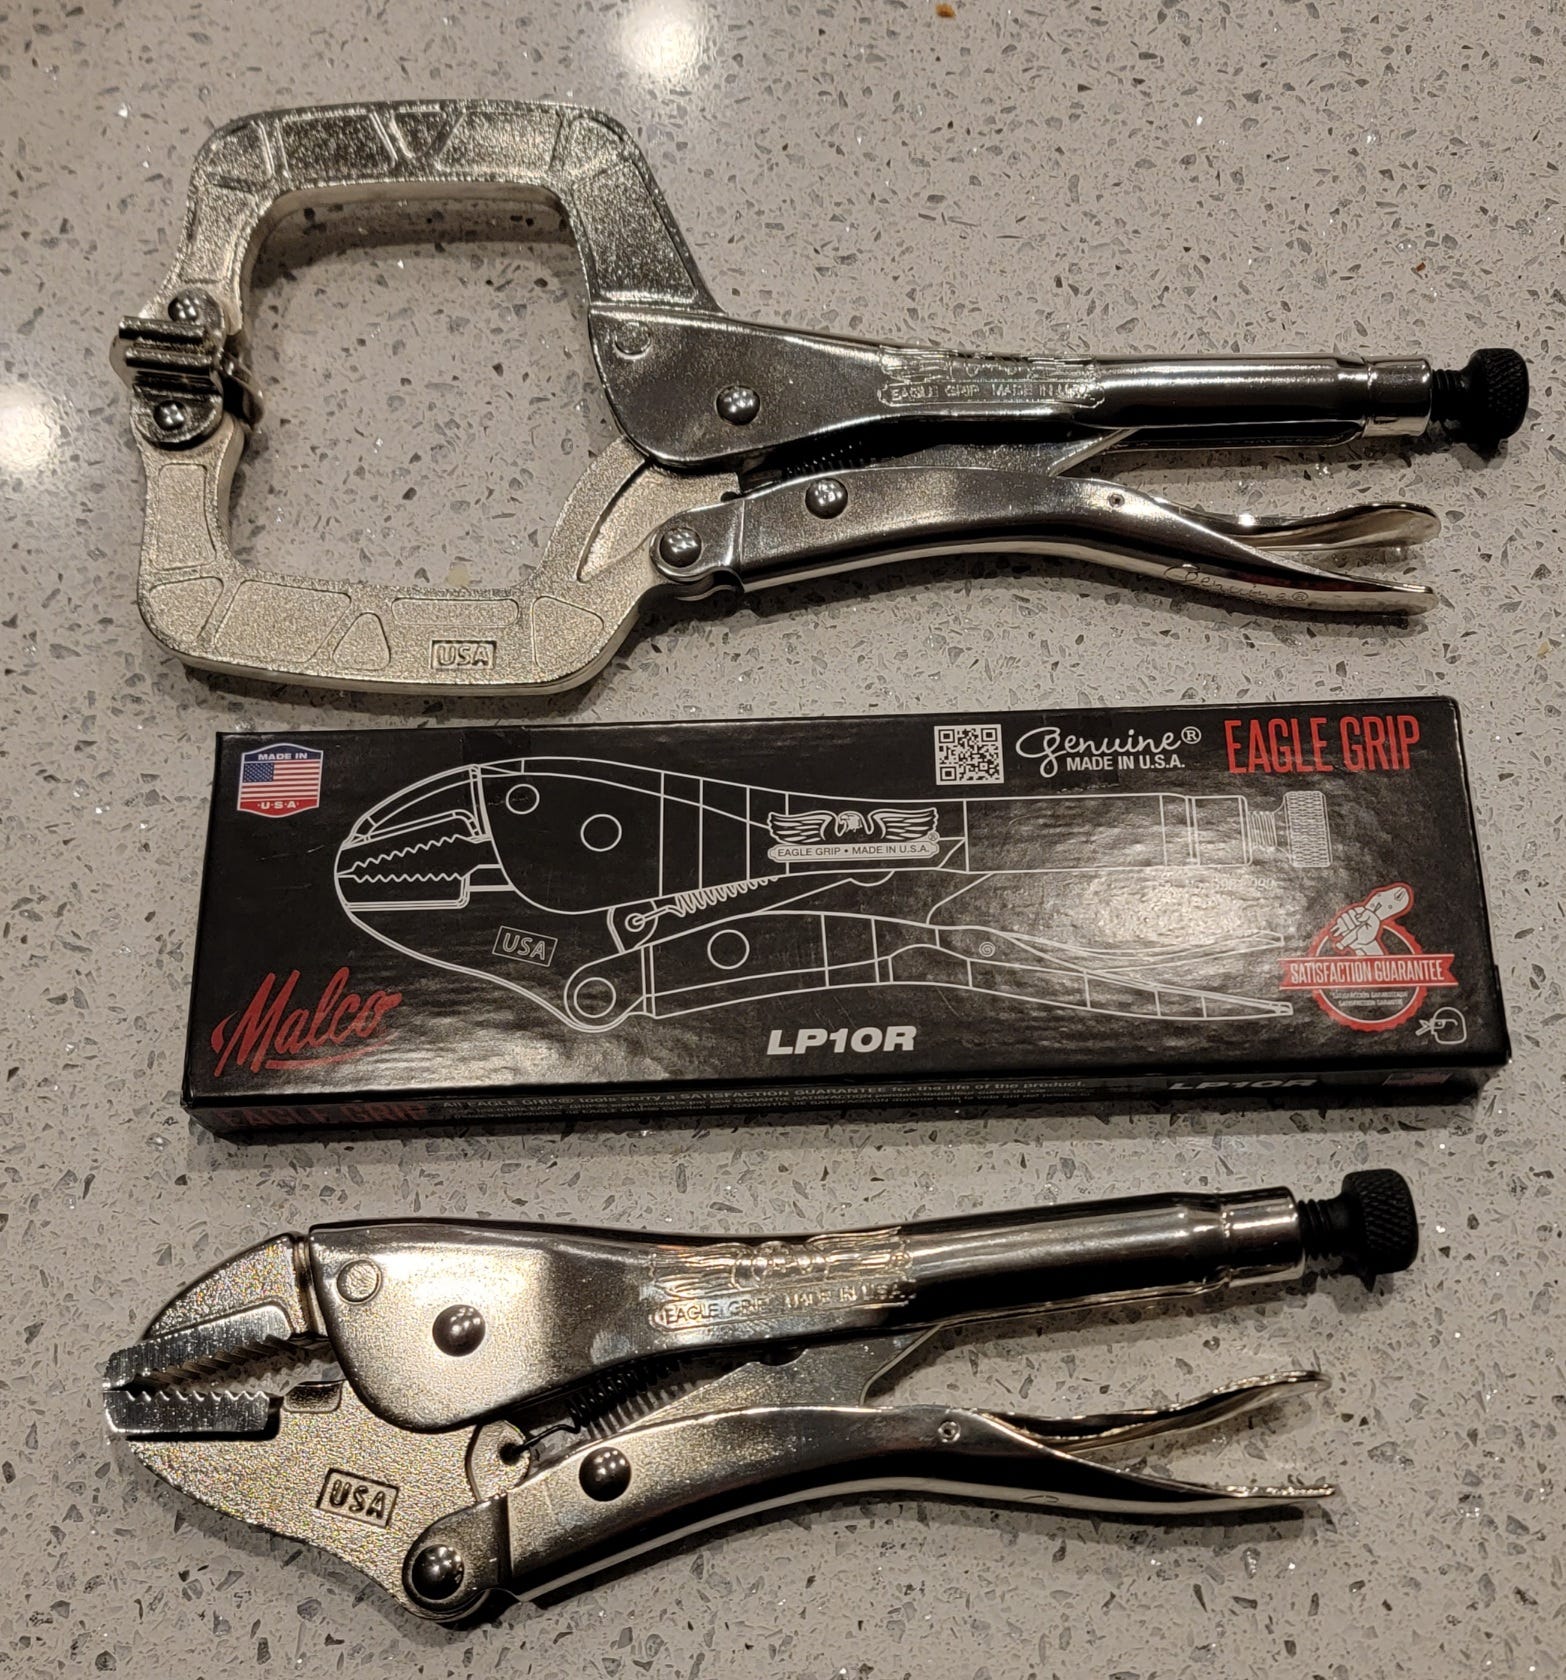 Made In The USA, Semi-Emergency Edition: Malco Eagle Grip Pliers